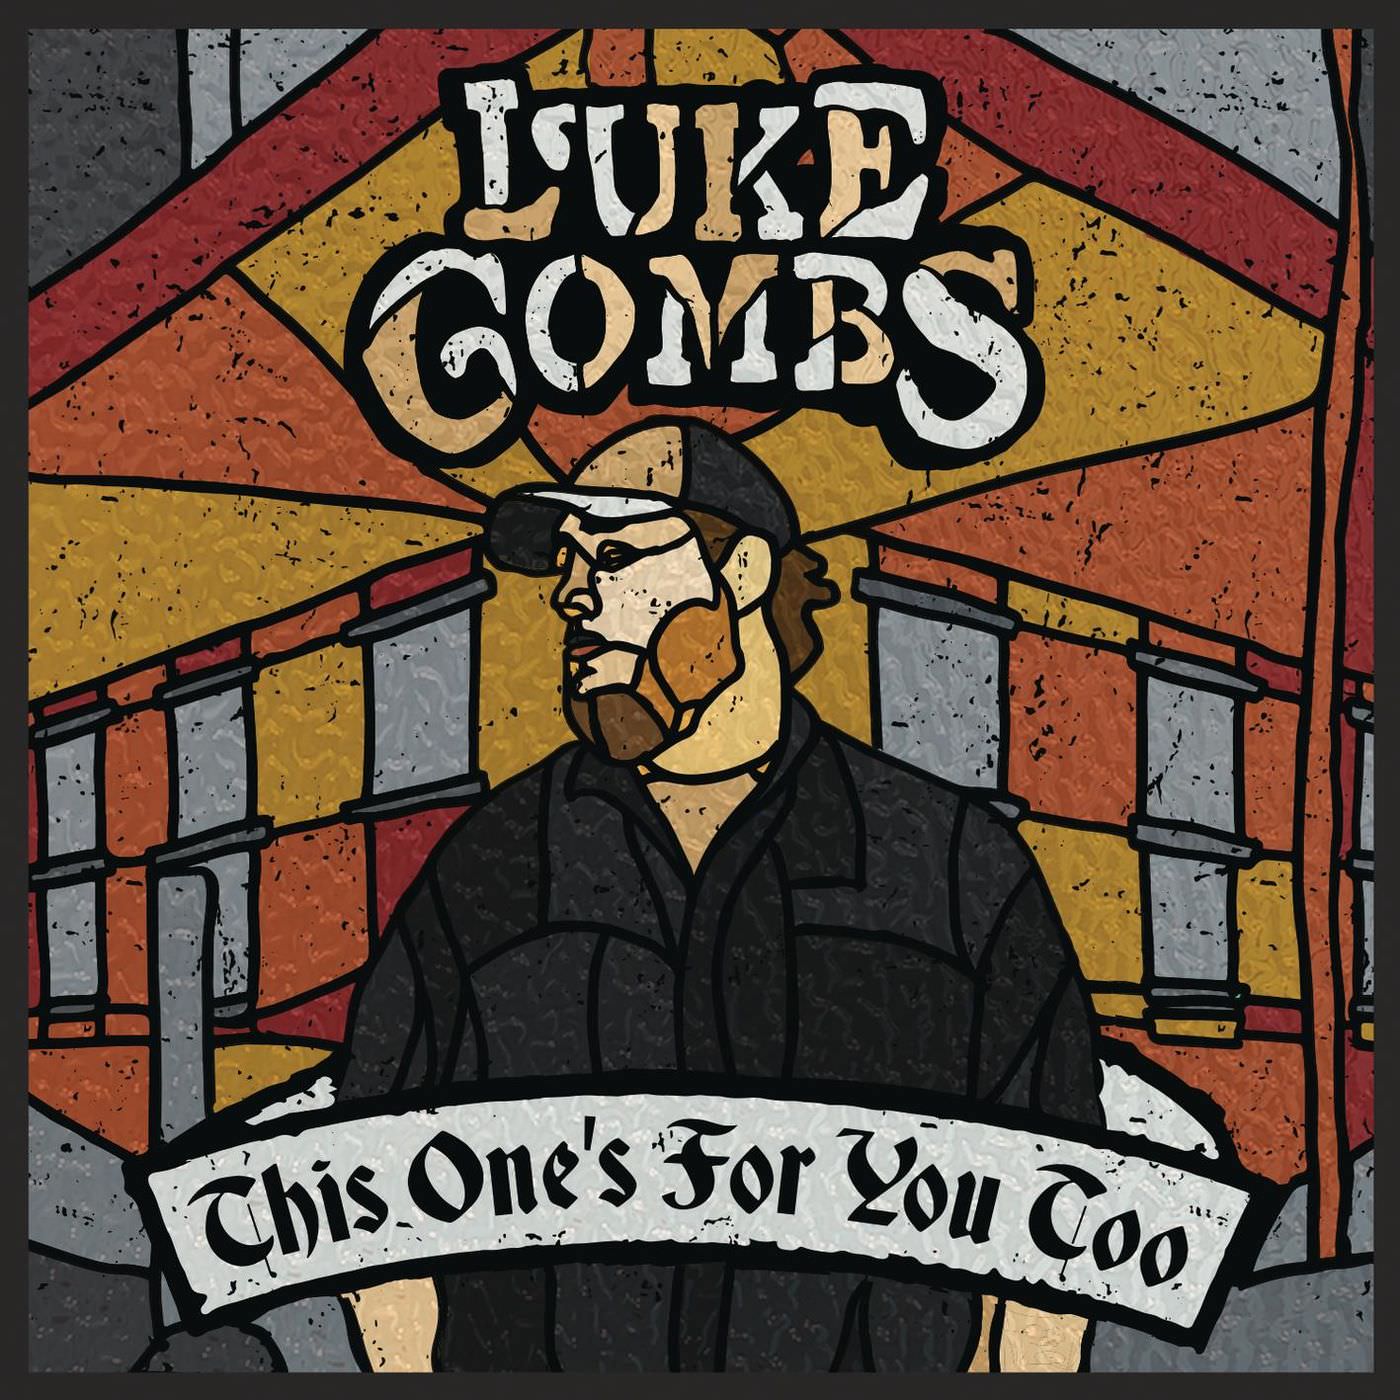 Luke Combs - This One’s for You Too (Deluxe Edition) (2017/2018) [FLAC 24bit/44,1kHz]